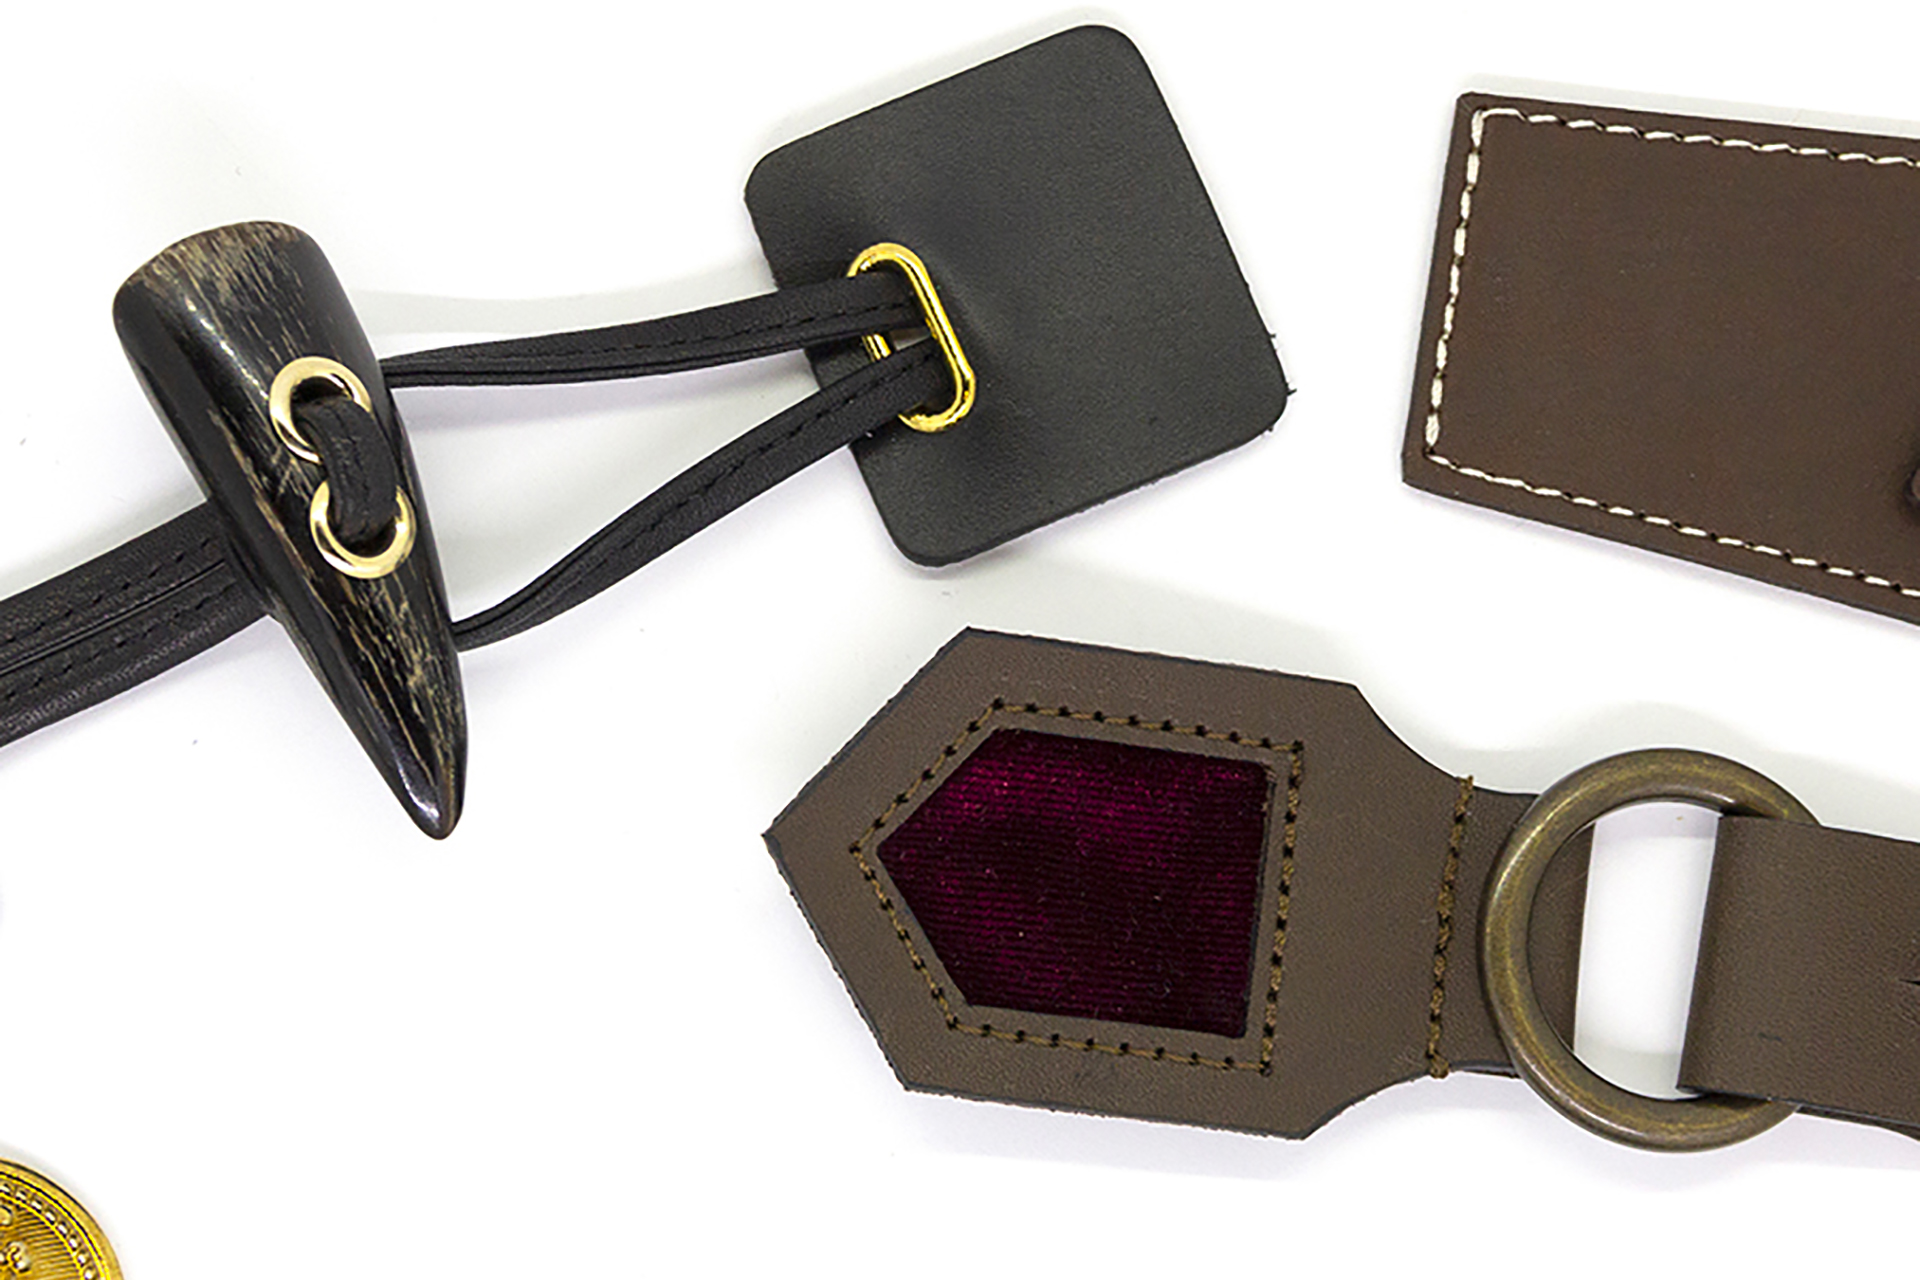 Accessories in genuine leather and synthetic materials